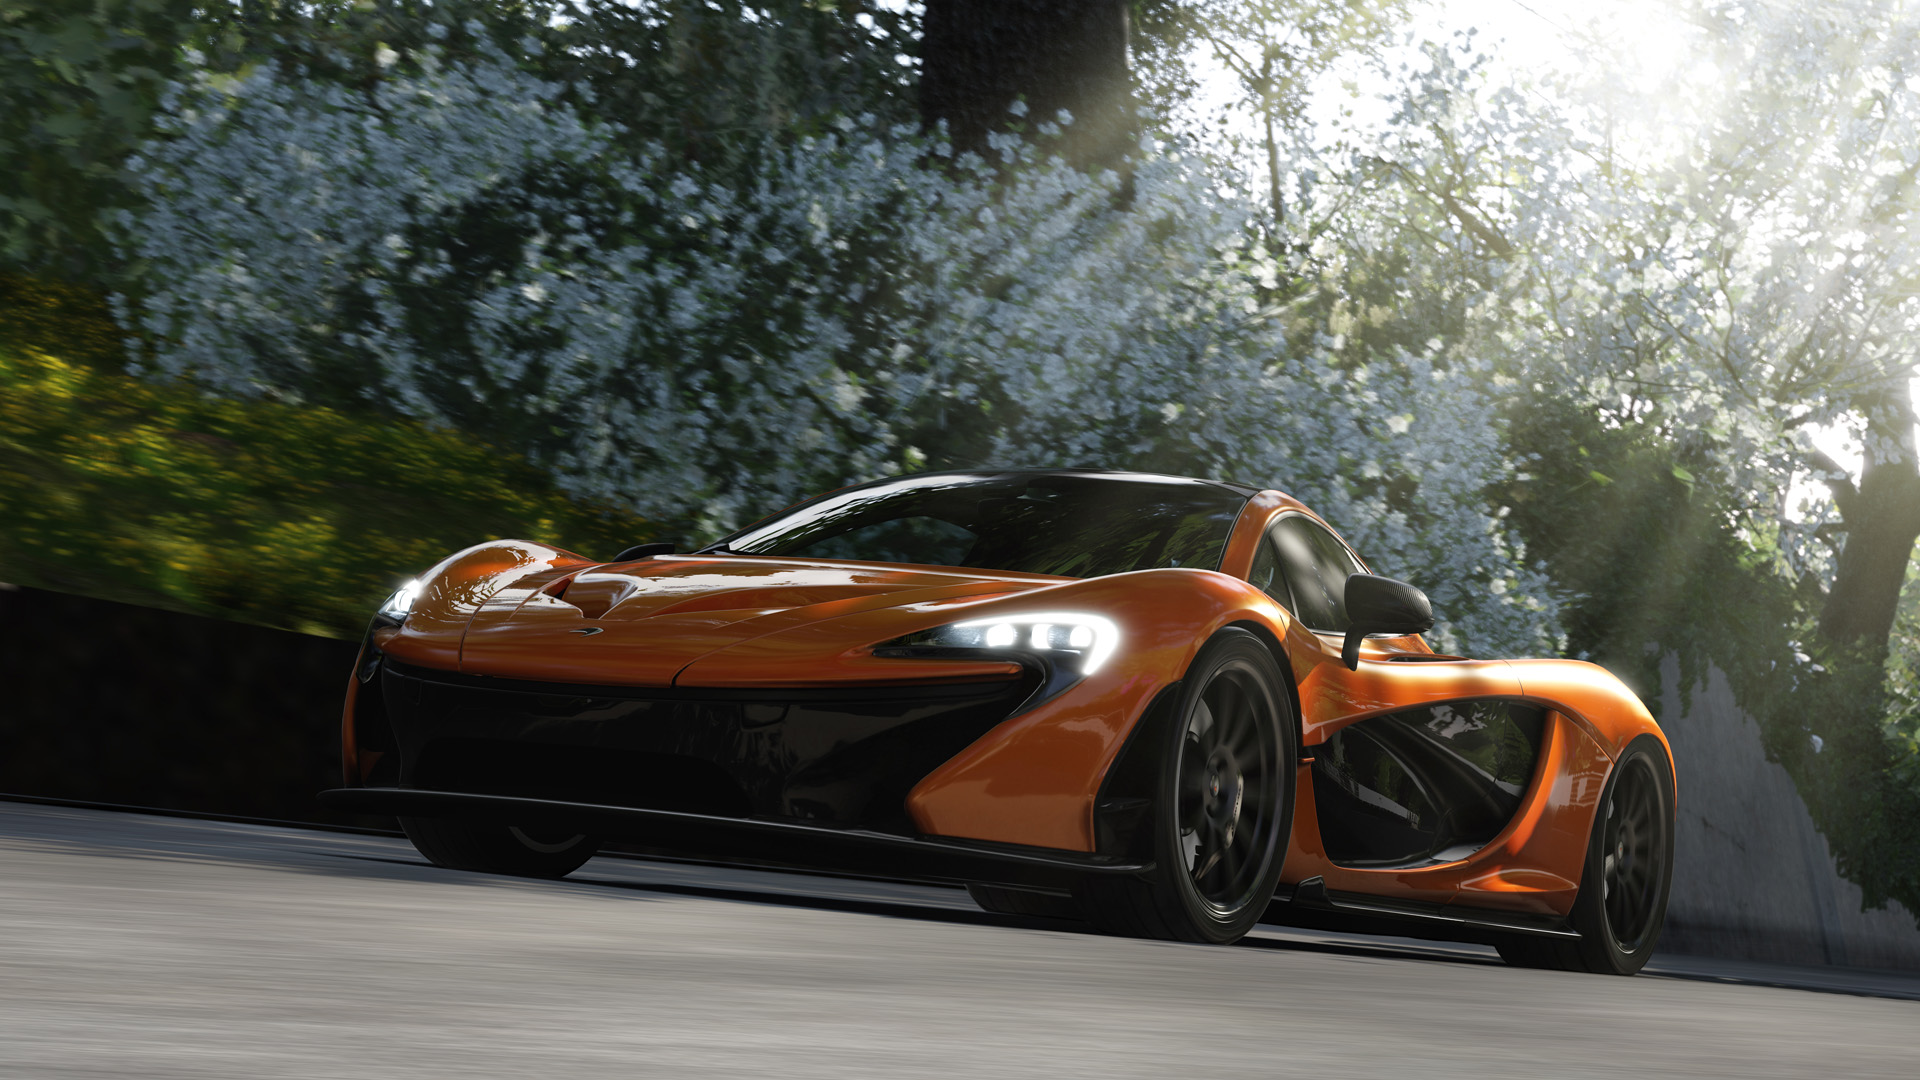 Video Game Forza Motorsport 5 1920x1080